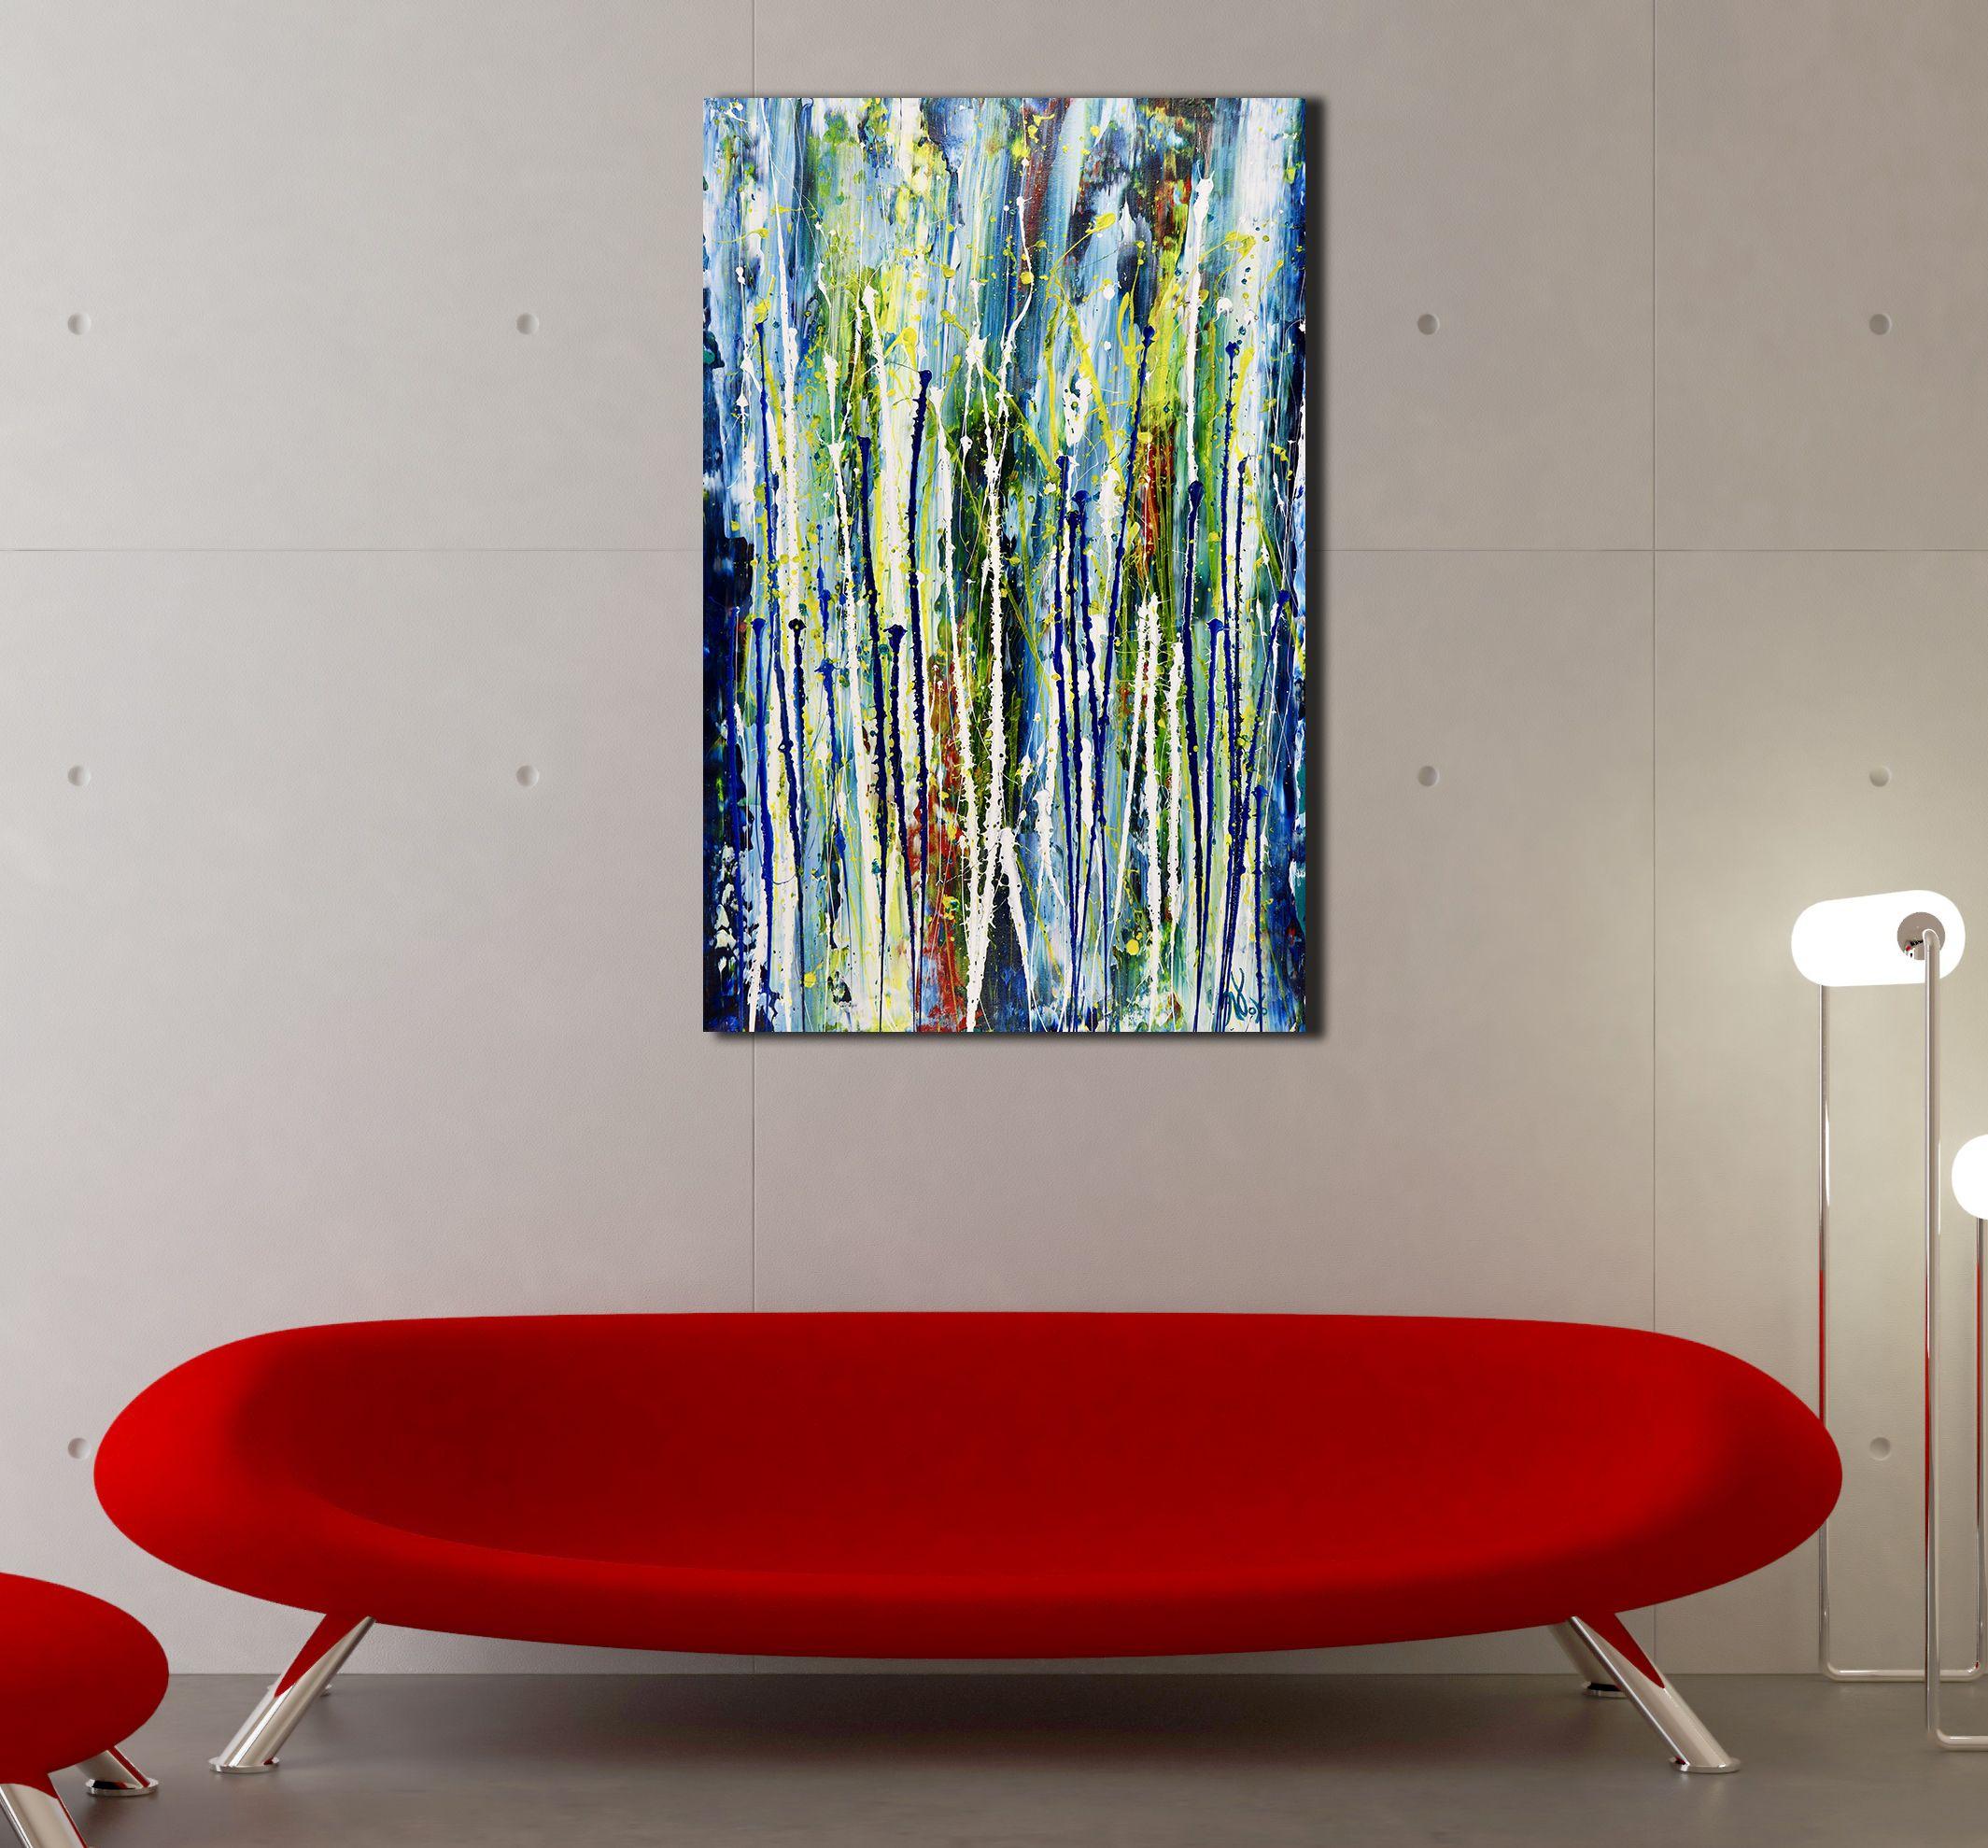 Energetic, impactful, bold and contemplative inspired by nature abstract. Rich colors with lots of light coming a blue, green and white background.    Many shades of blue, green, white, sienna, some red and yellow drizzles. This artwork is full of